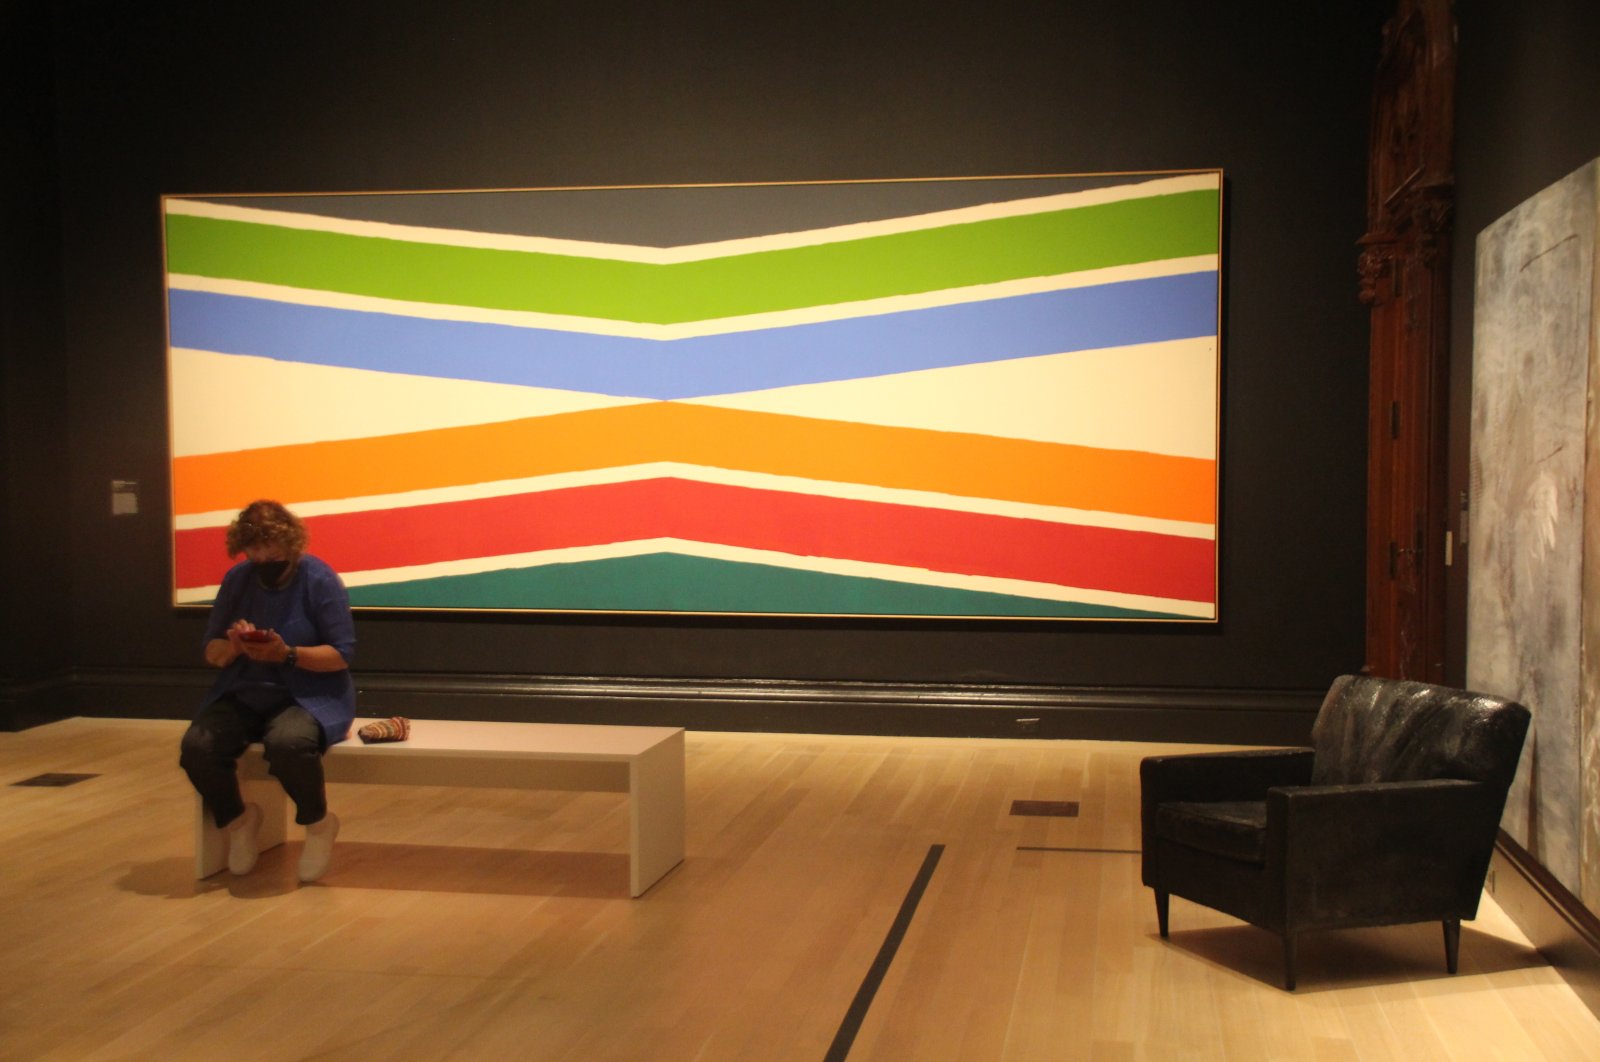 &quot;Tropical Zone&quot; by Kenneth Noland is among the works on display in a New York Jewish Museum show exploring the tumultuous mid-1960s period. (DPA Photo)